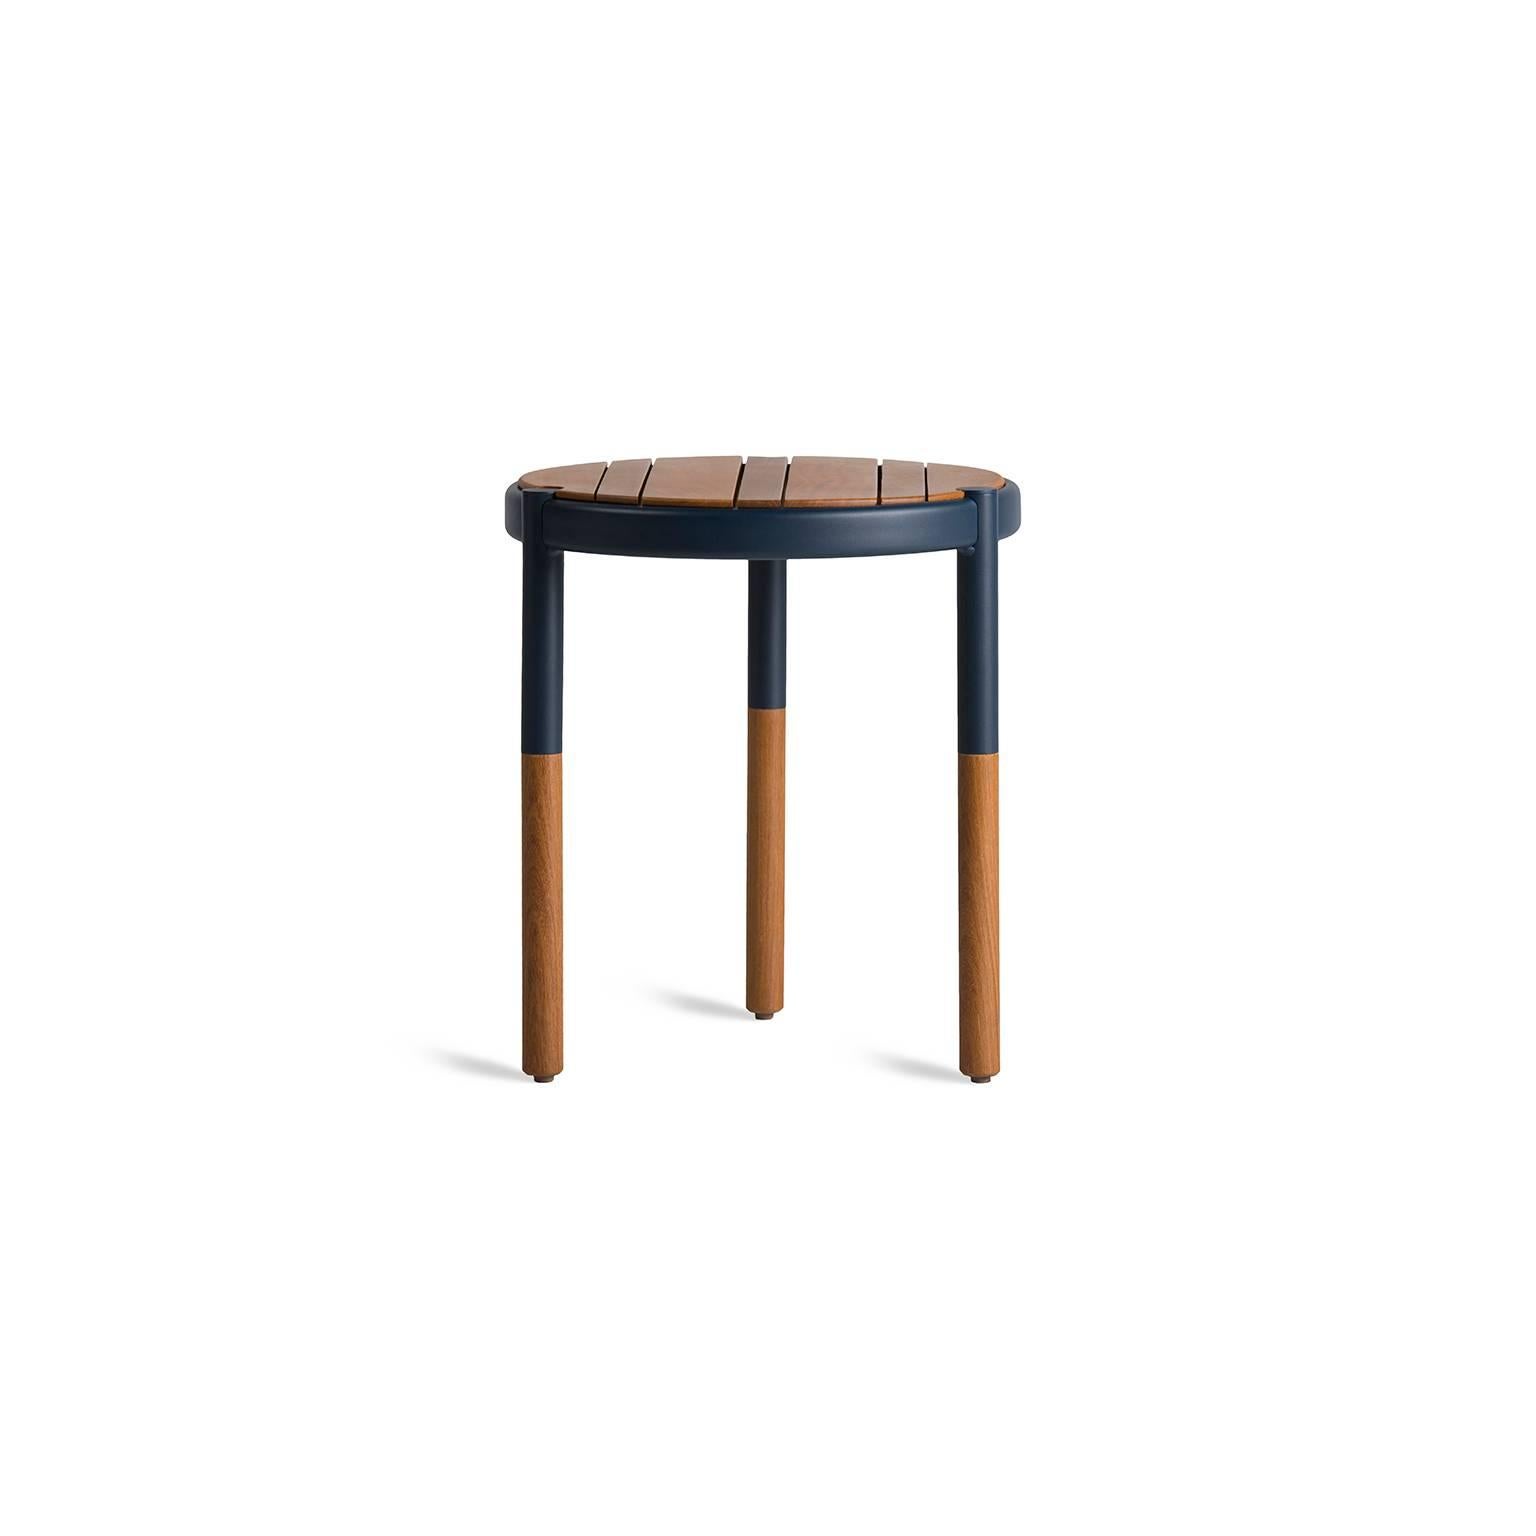 These nesting side tables, made ins olid wood and metal are designed for outdoor use. The round side table, minimalist design for outdoors is a side table that combines thin solid wood thickness with a heavy duty body, we combine the sweet and